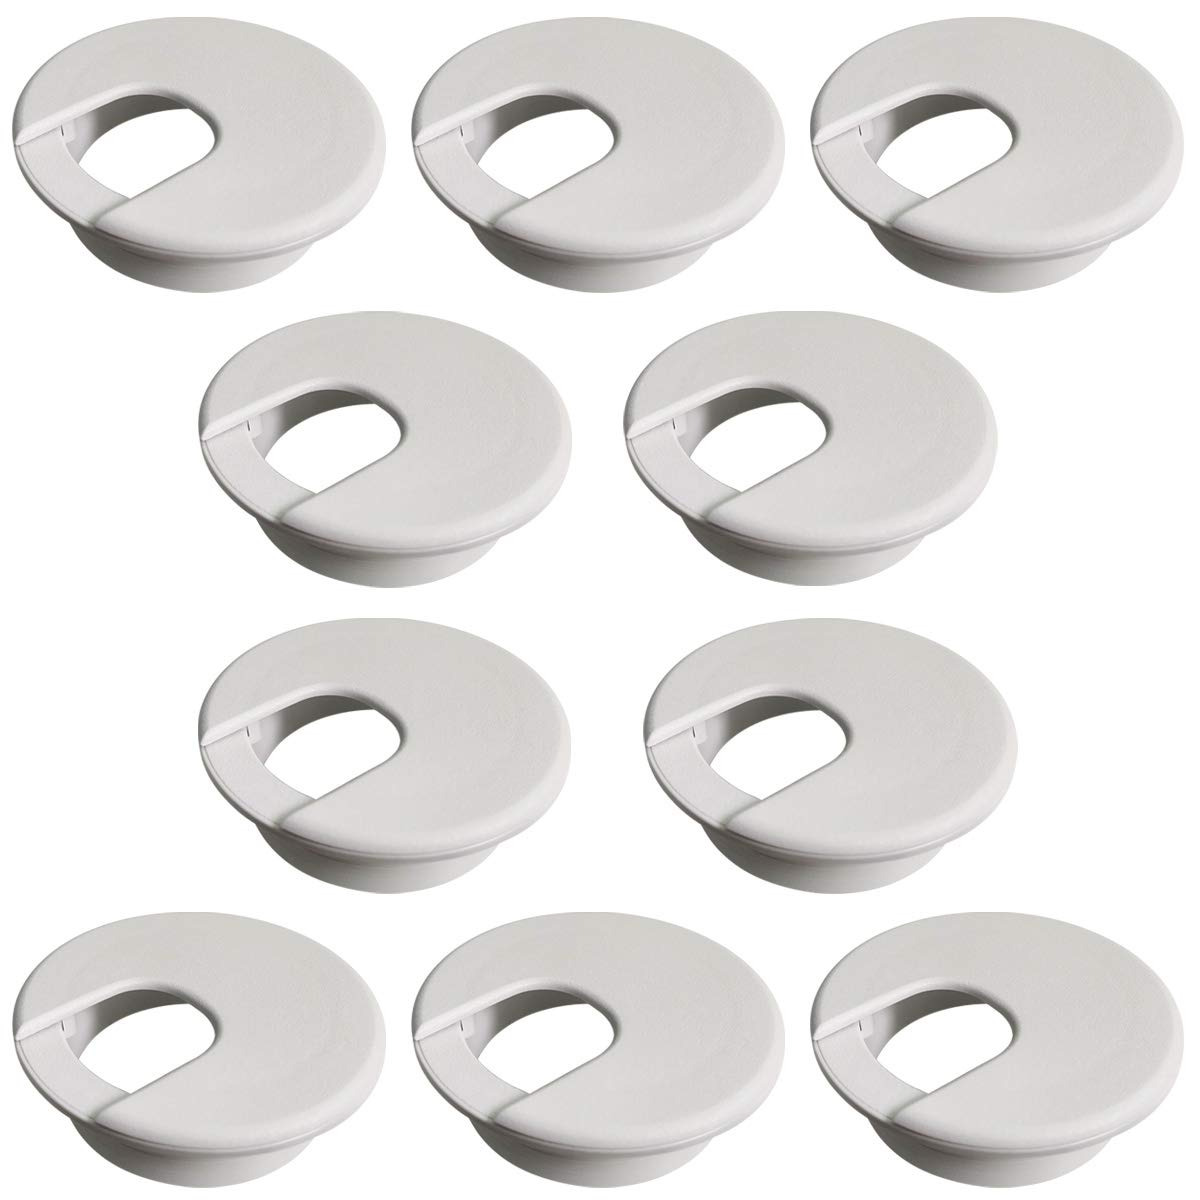 6Pcs Desk Grommet 1-3/8 Inch Plastic Wire Cord Cable Grommets Hole Cover for Off